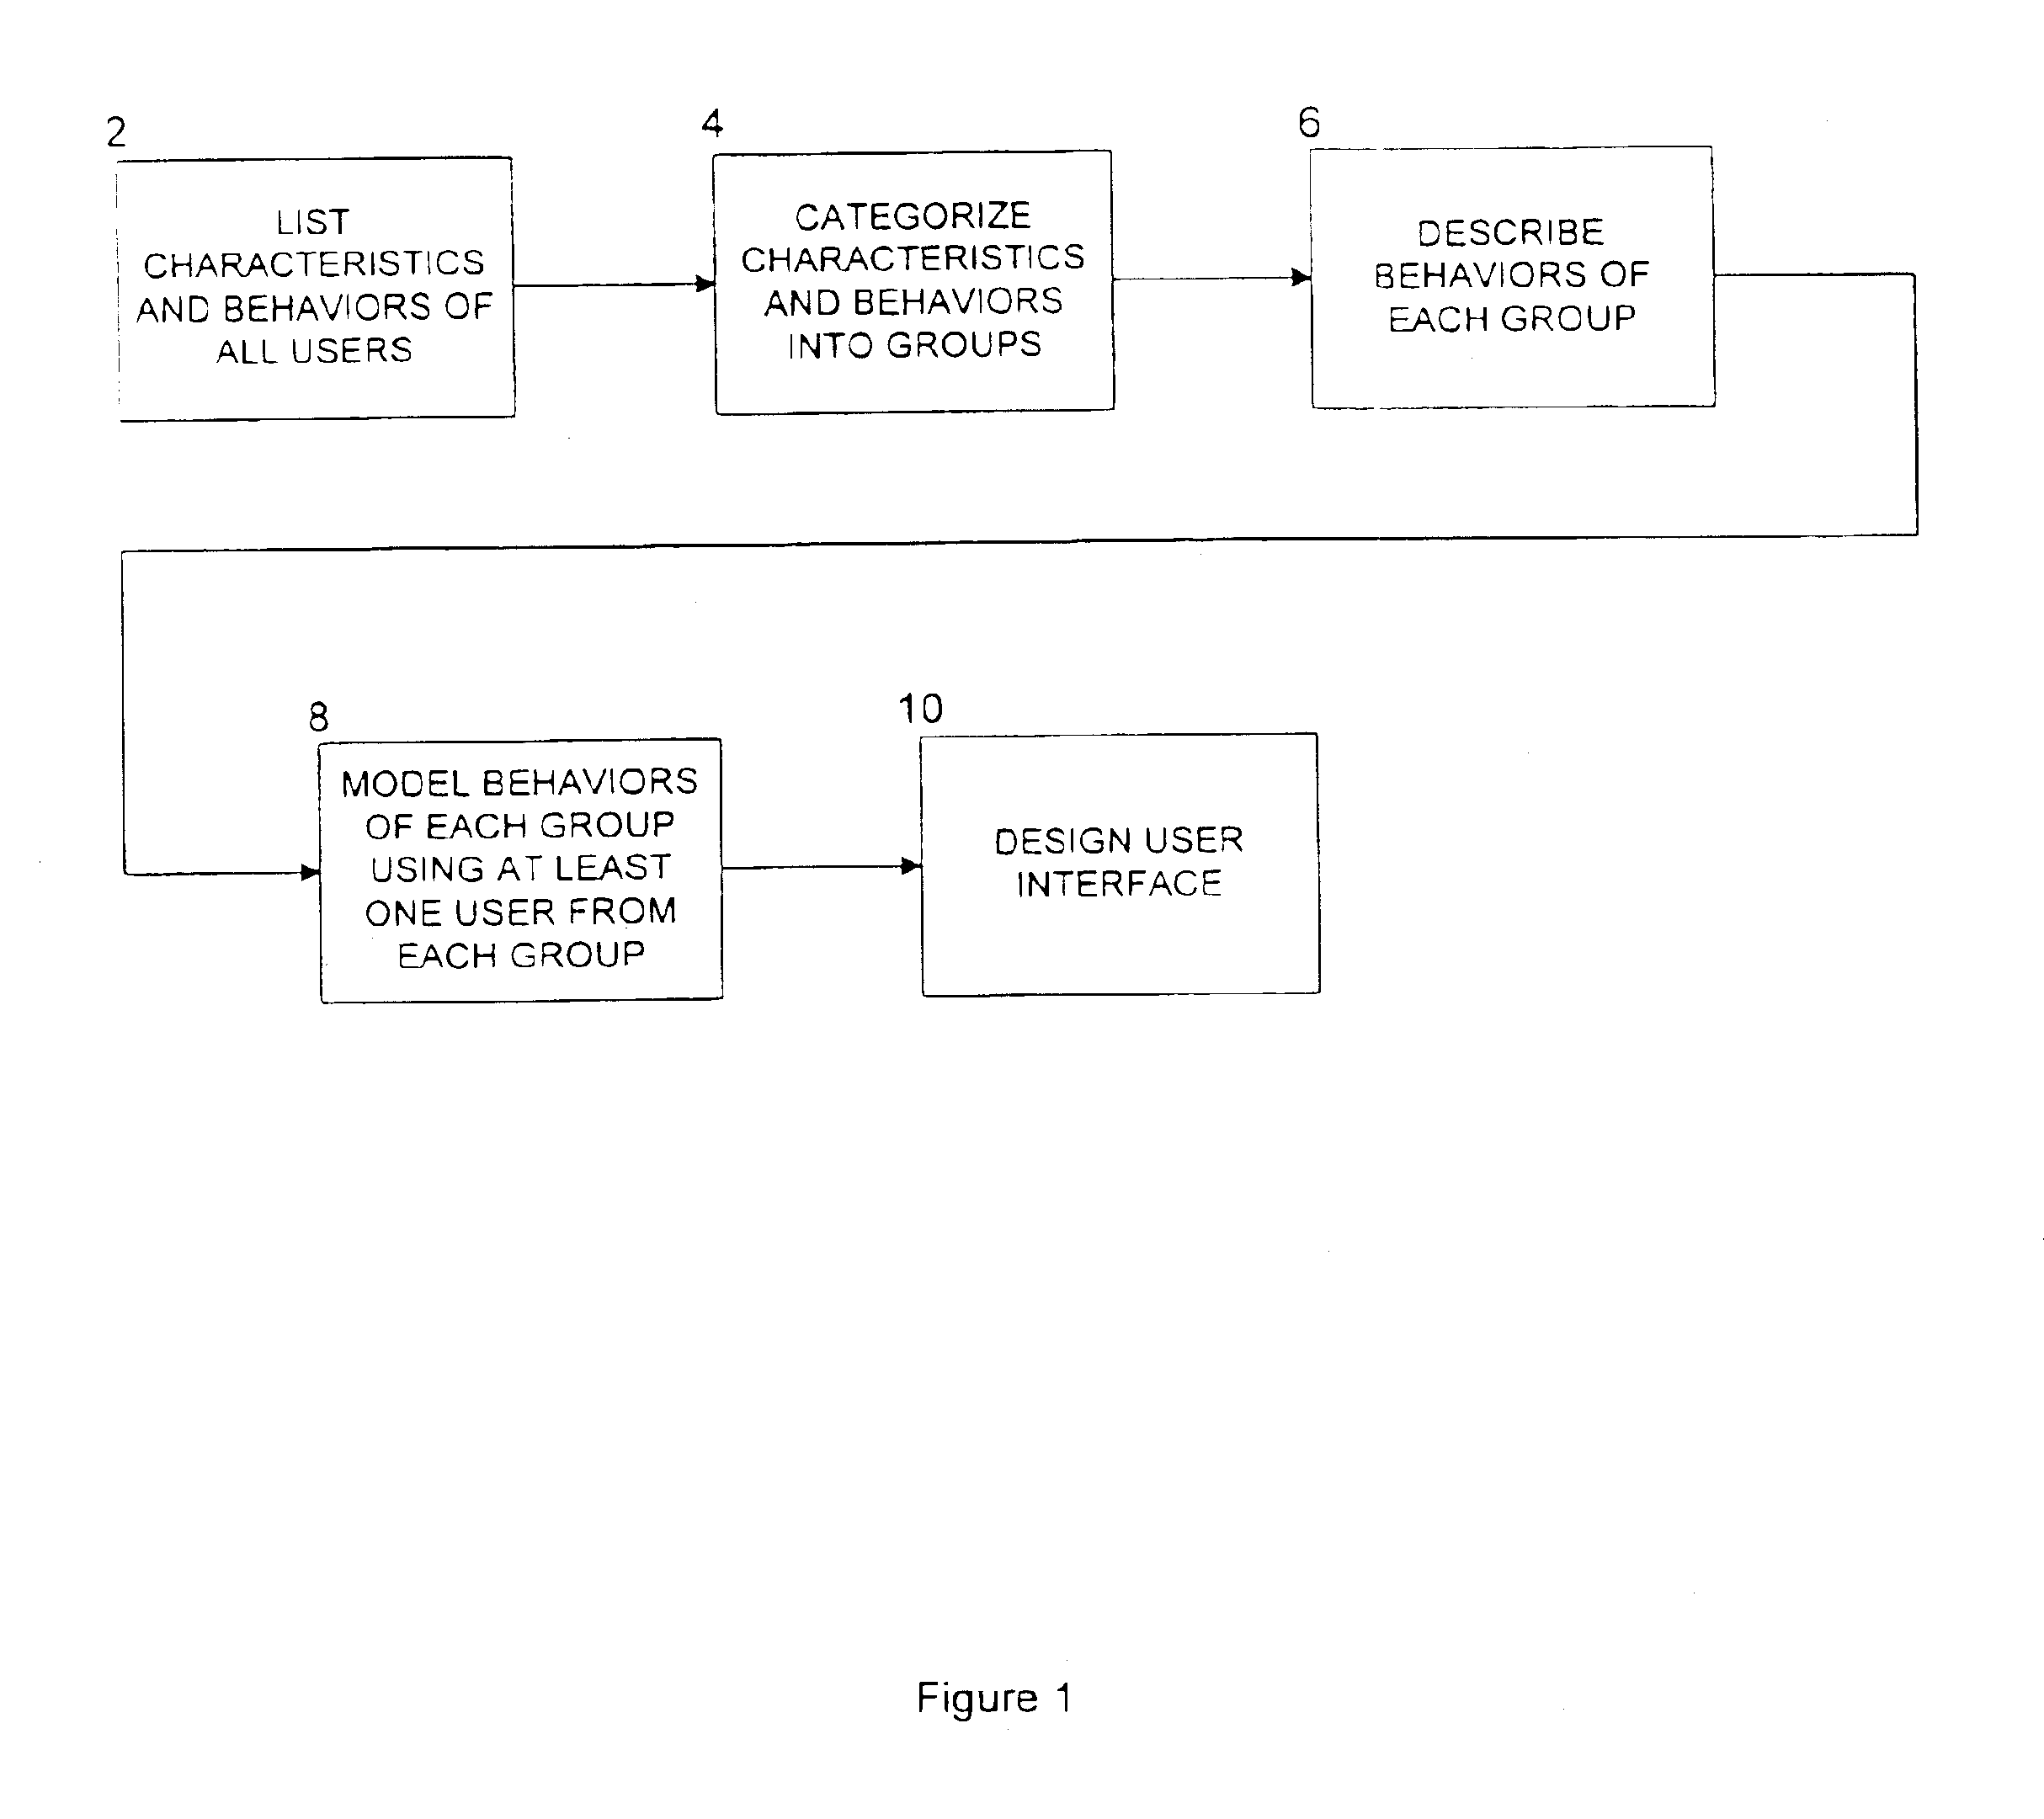 Method for categorizing, describing and modeling types of system users